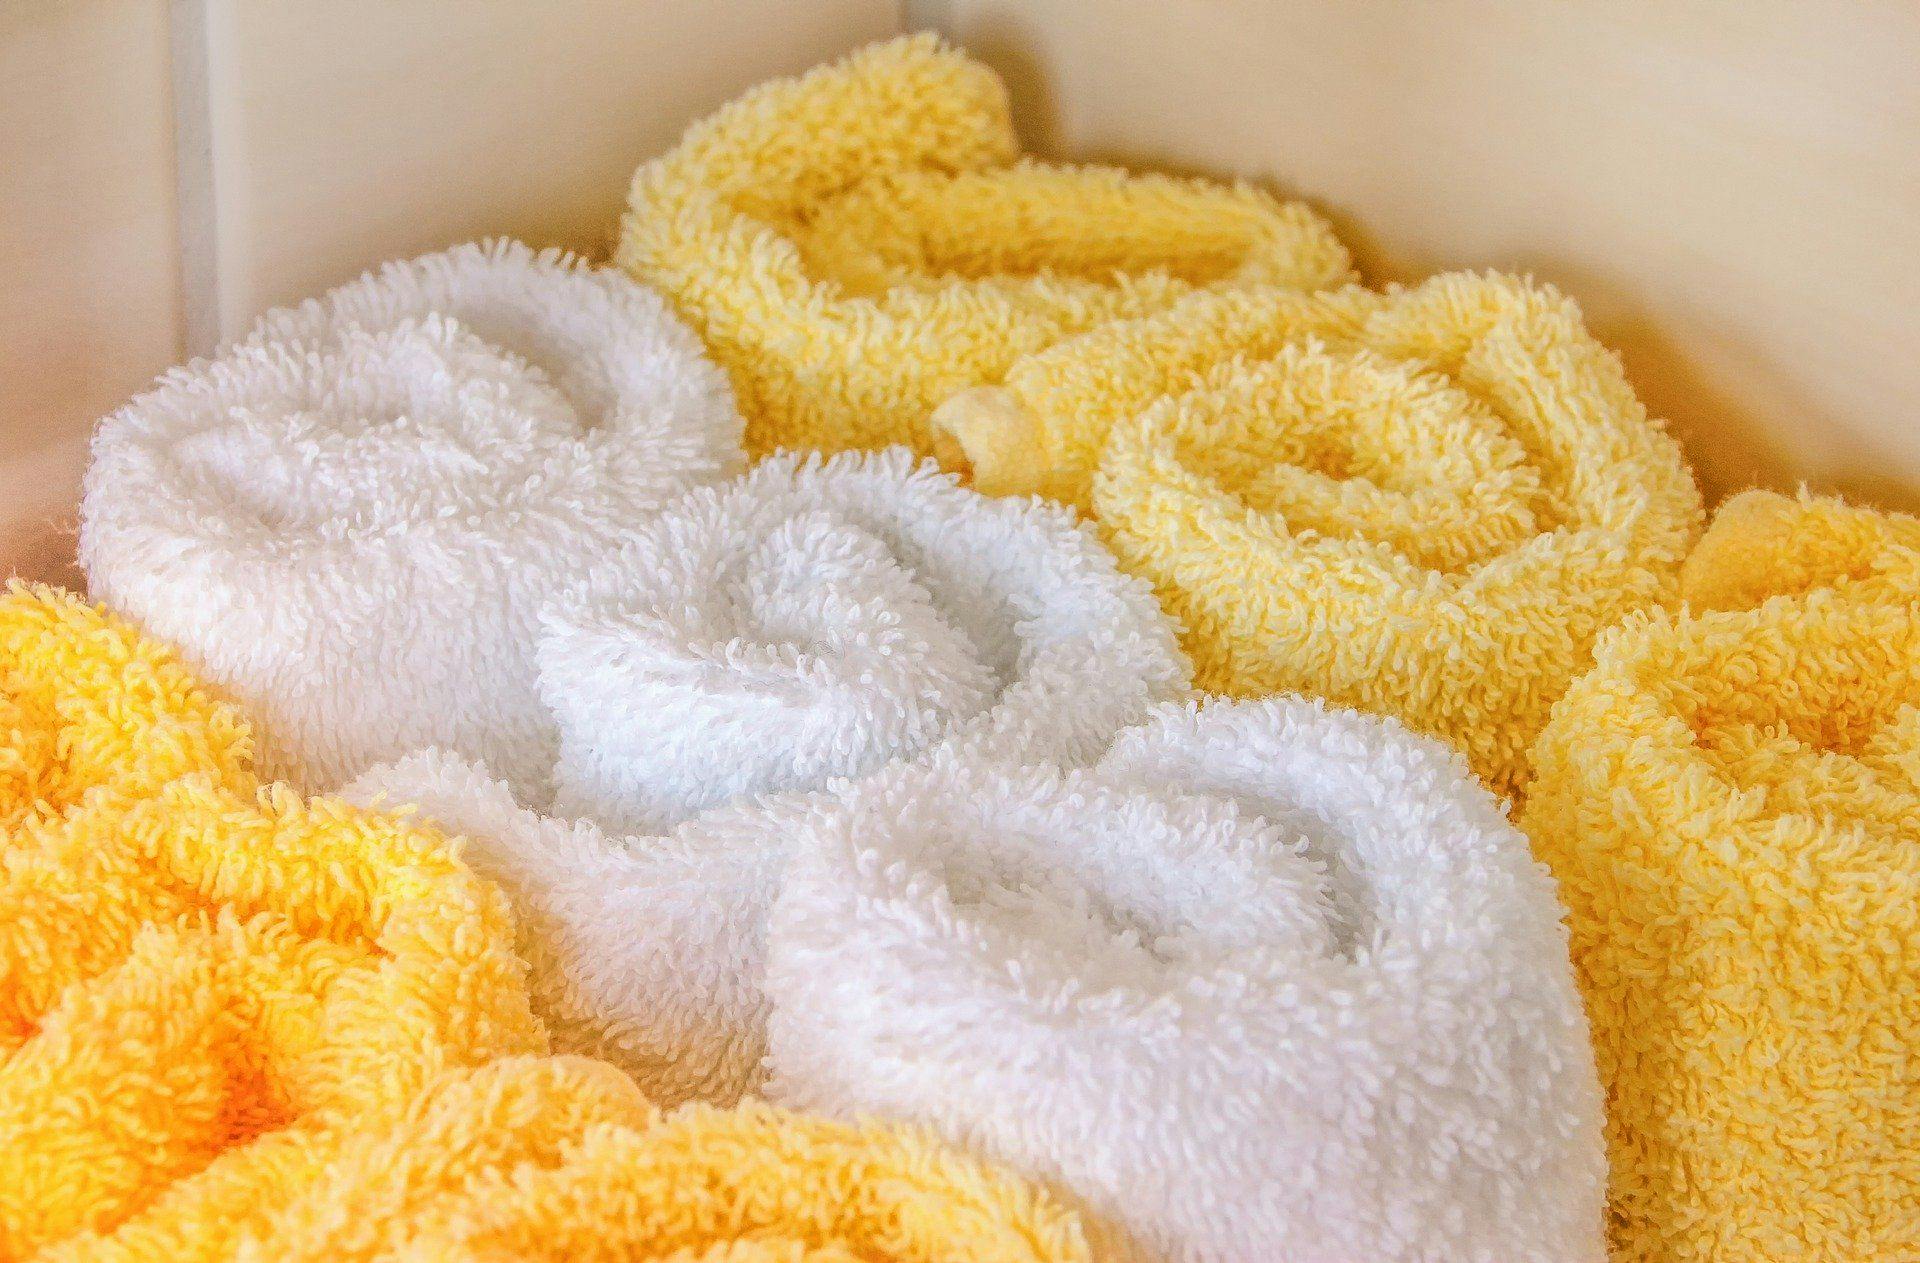 Warm washcloths are rolled up in bundles